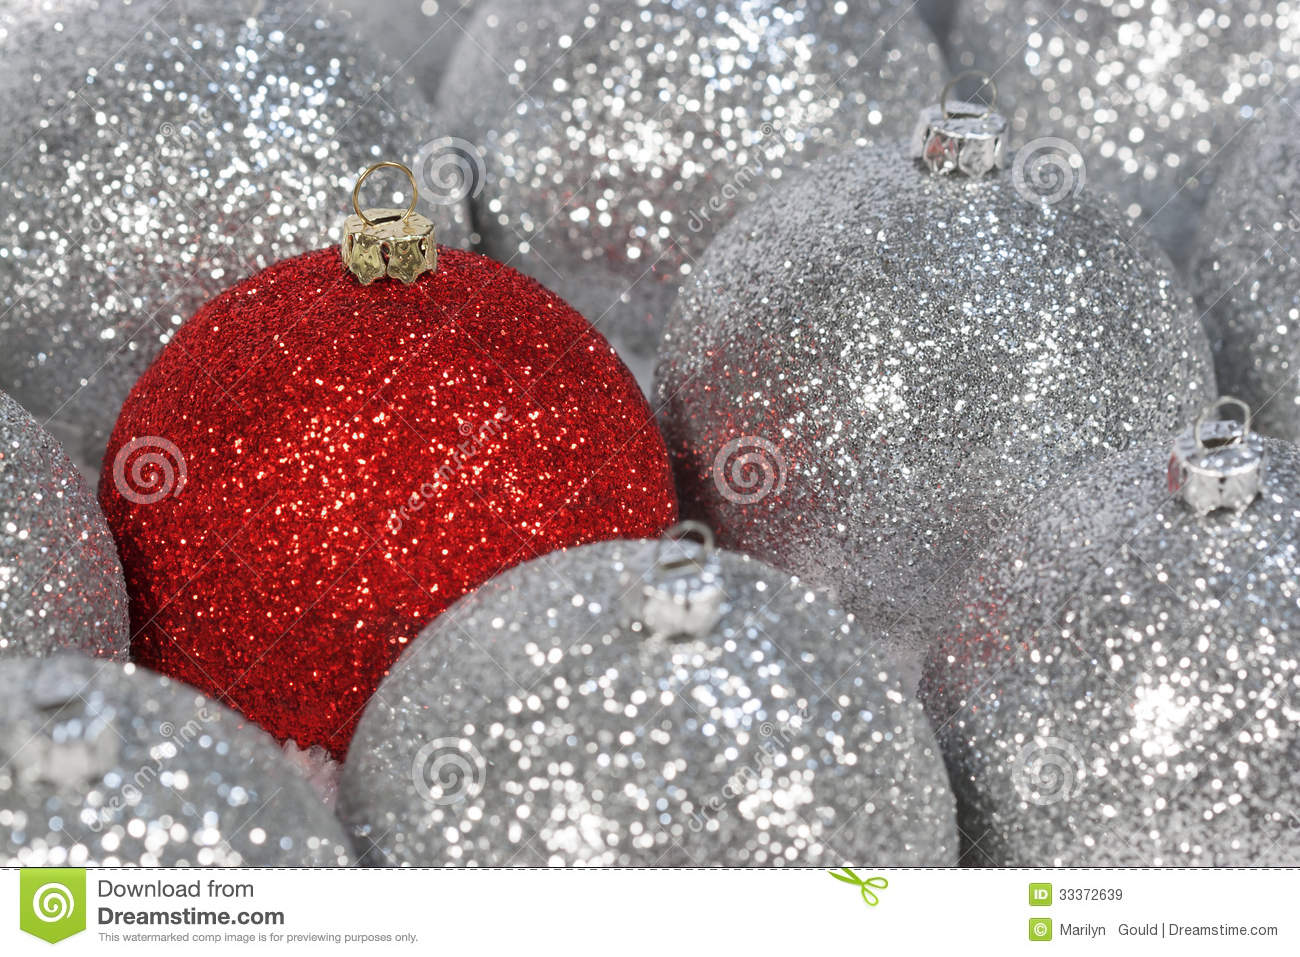 Red Silver Christmas Ornaments Royalty Free Stock Images   Image    